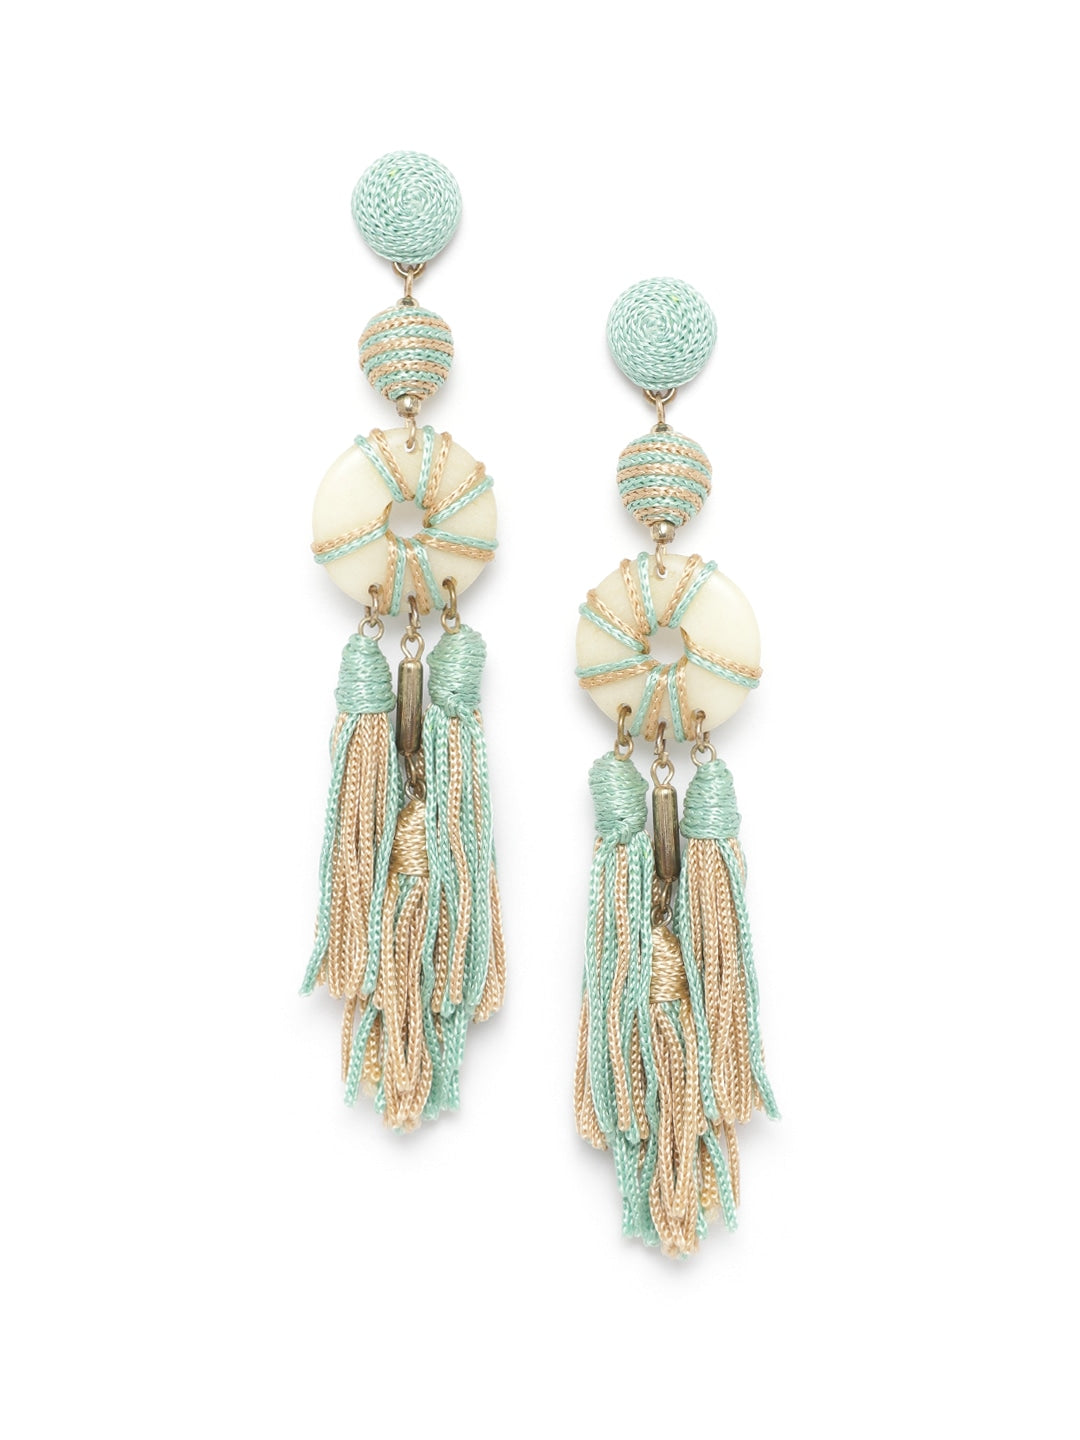 Mint Green & Beige Antique Gold-Plated Tasselled Contemporary Drop Earrings